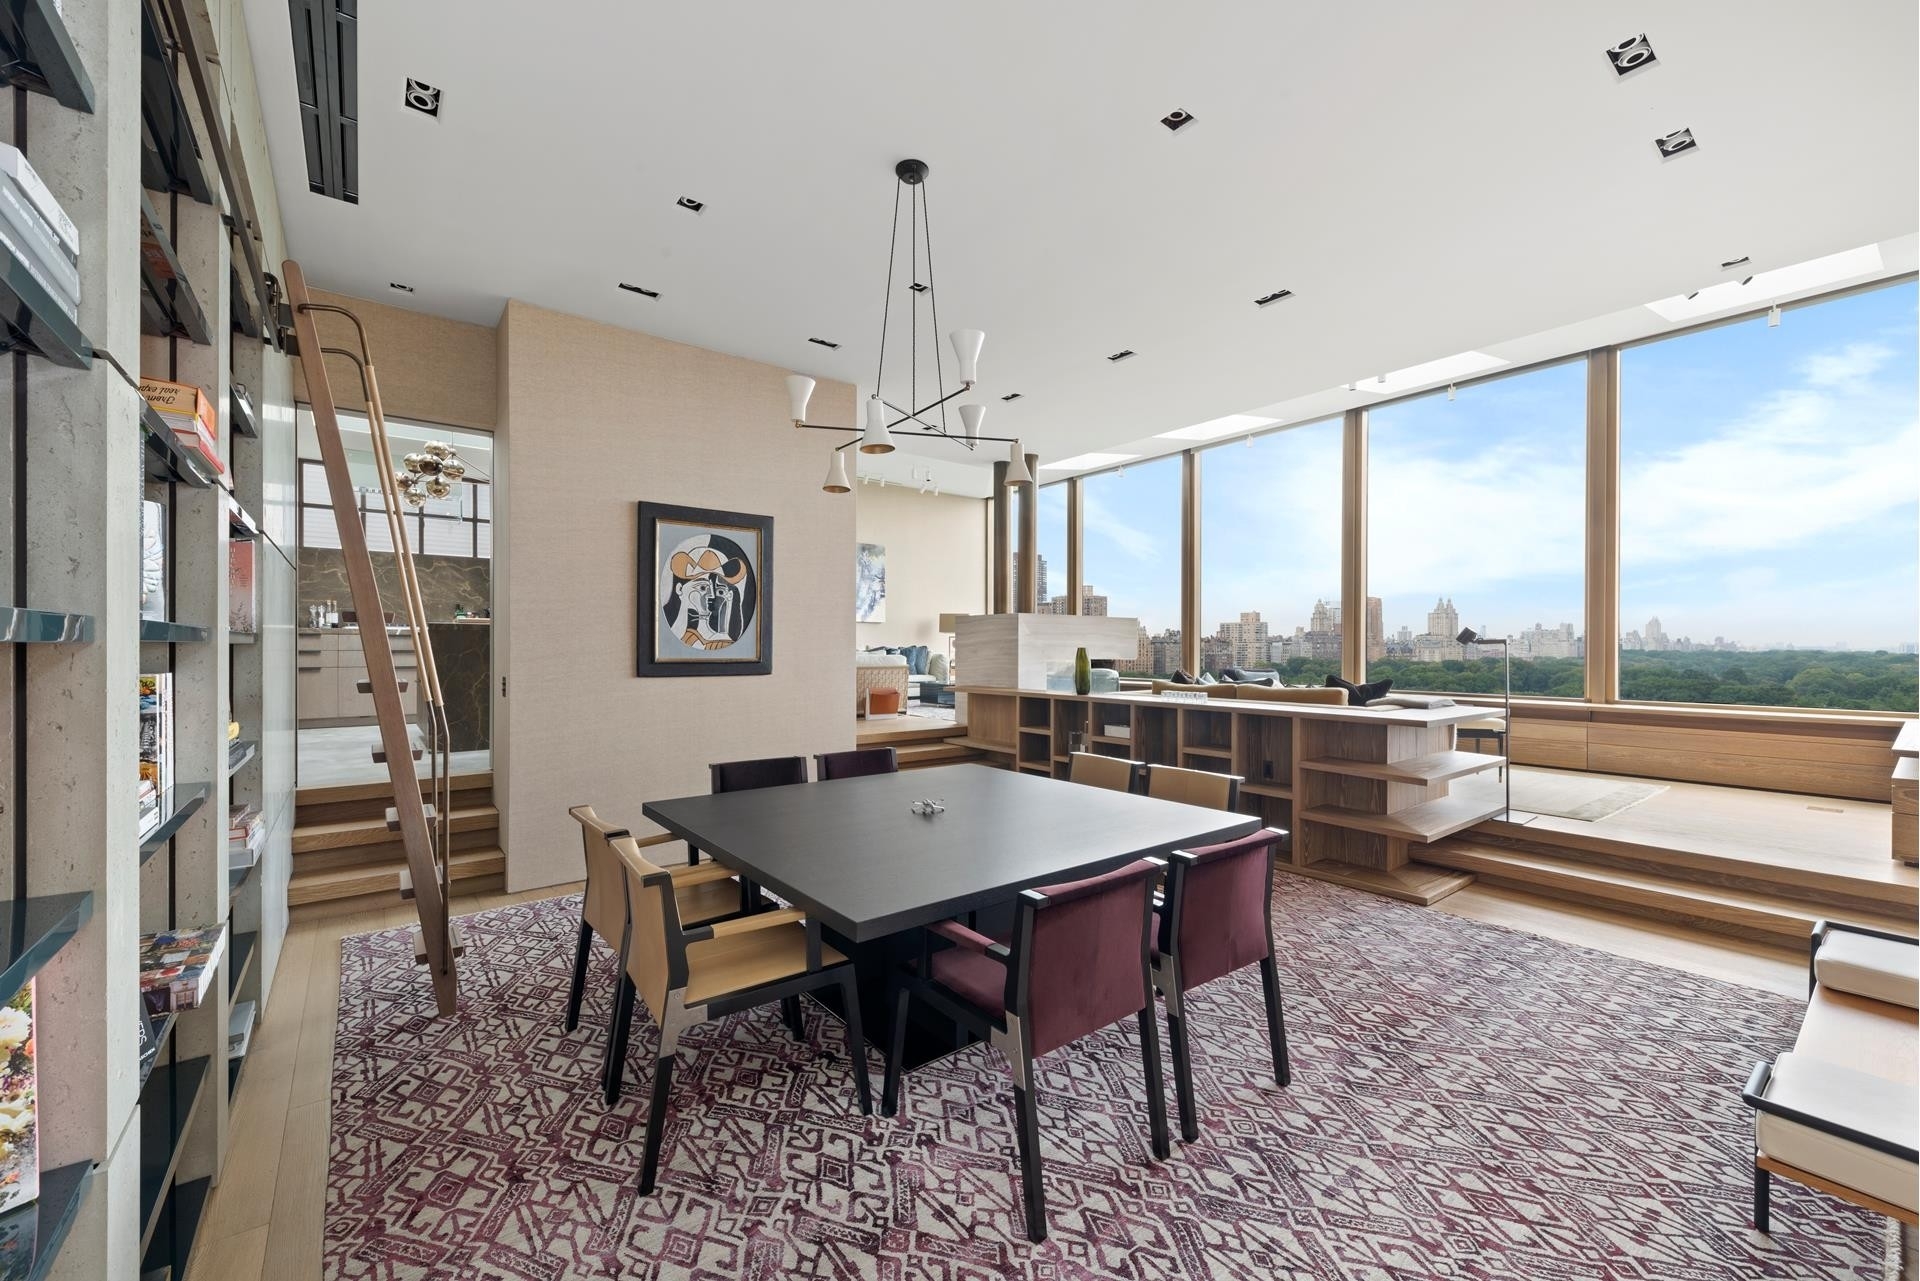 15. Co-op Properties for Sale at 128 CENTRAL PARK S, PH/15A Central Park South, New York, NY 10019